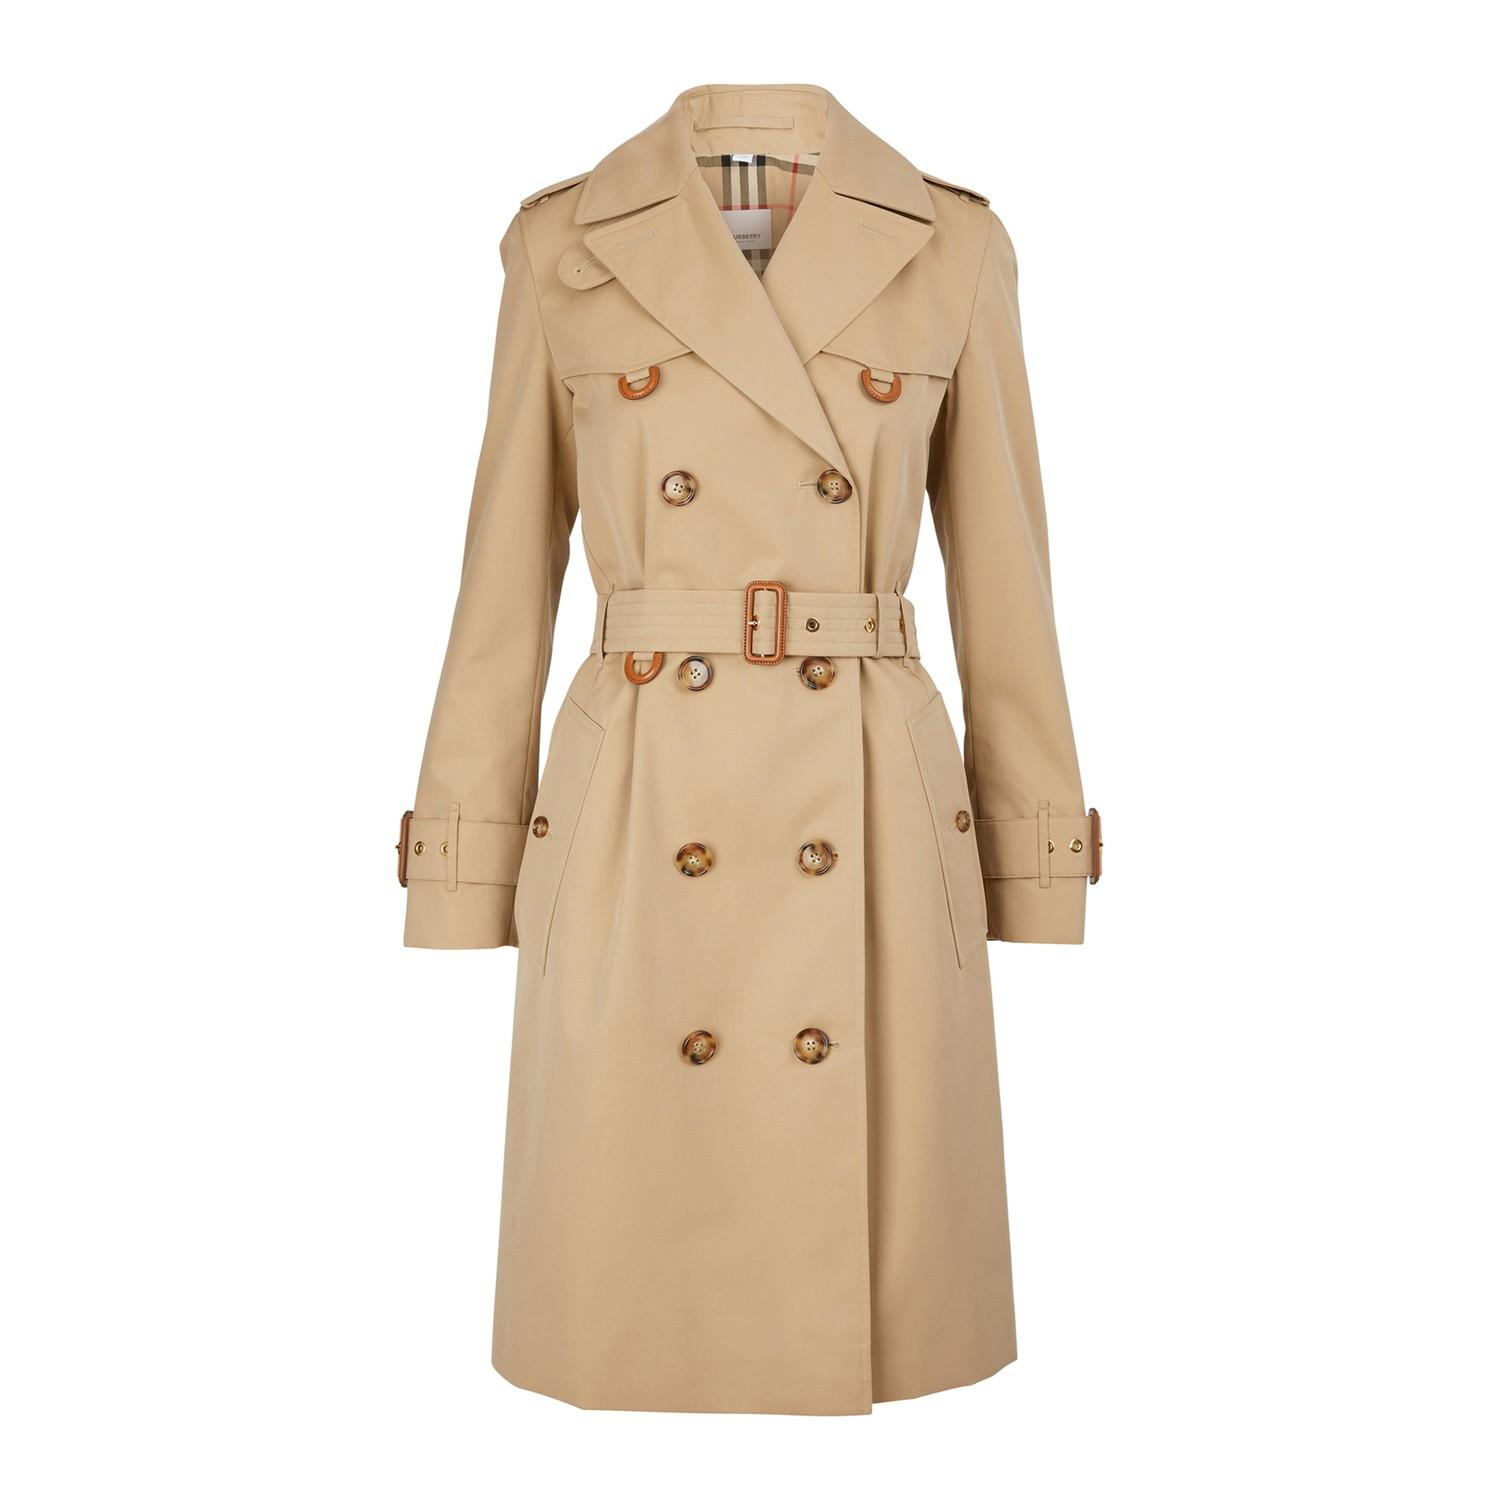 Burberry Islington Trench Jacket in Honey (Natural) - Lyst